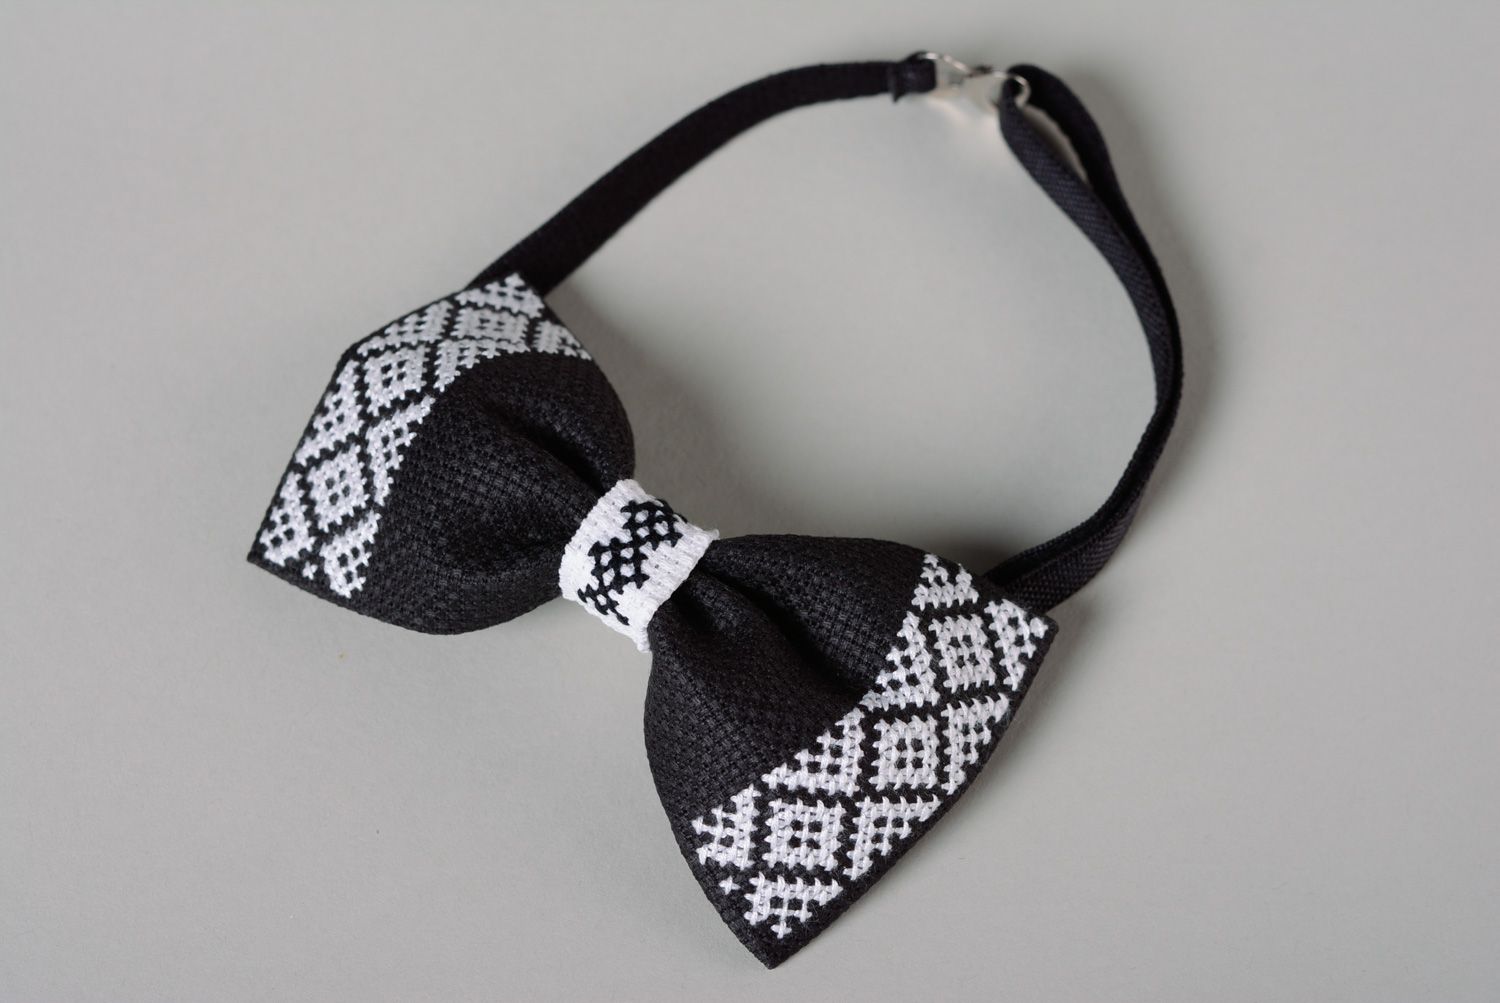 Handmade ethnic bow tie with cross stitch embroidery in black and white colors photo 2